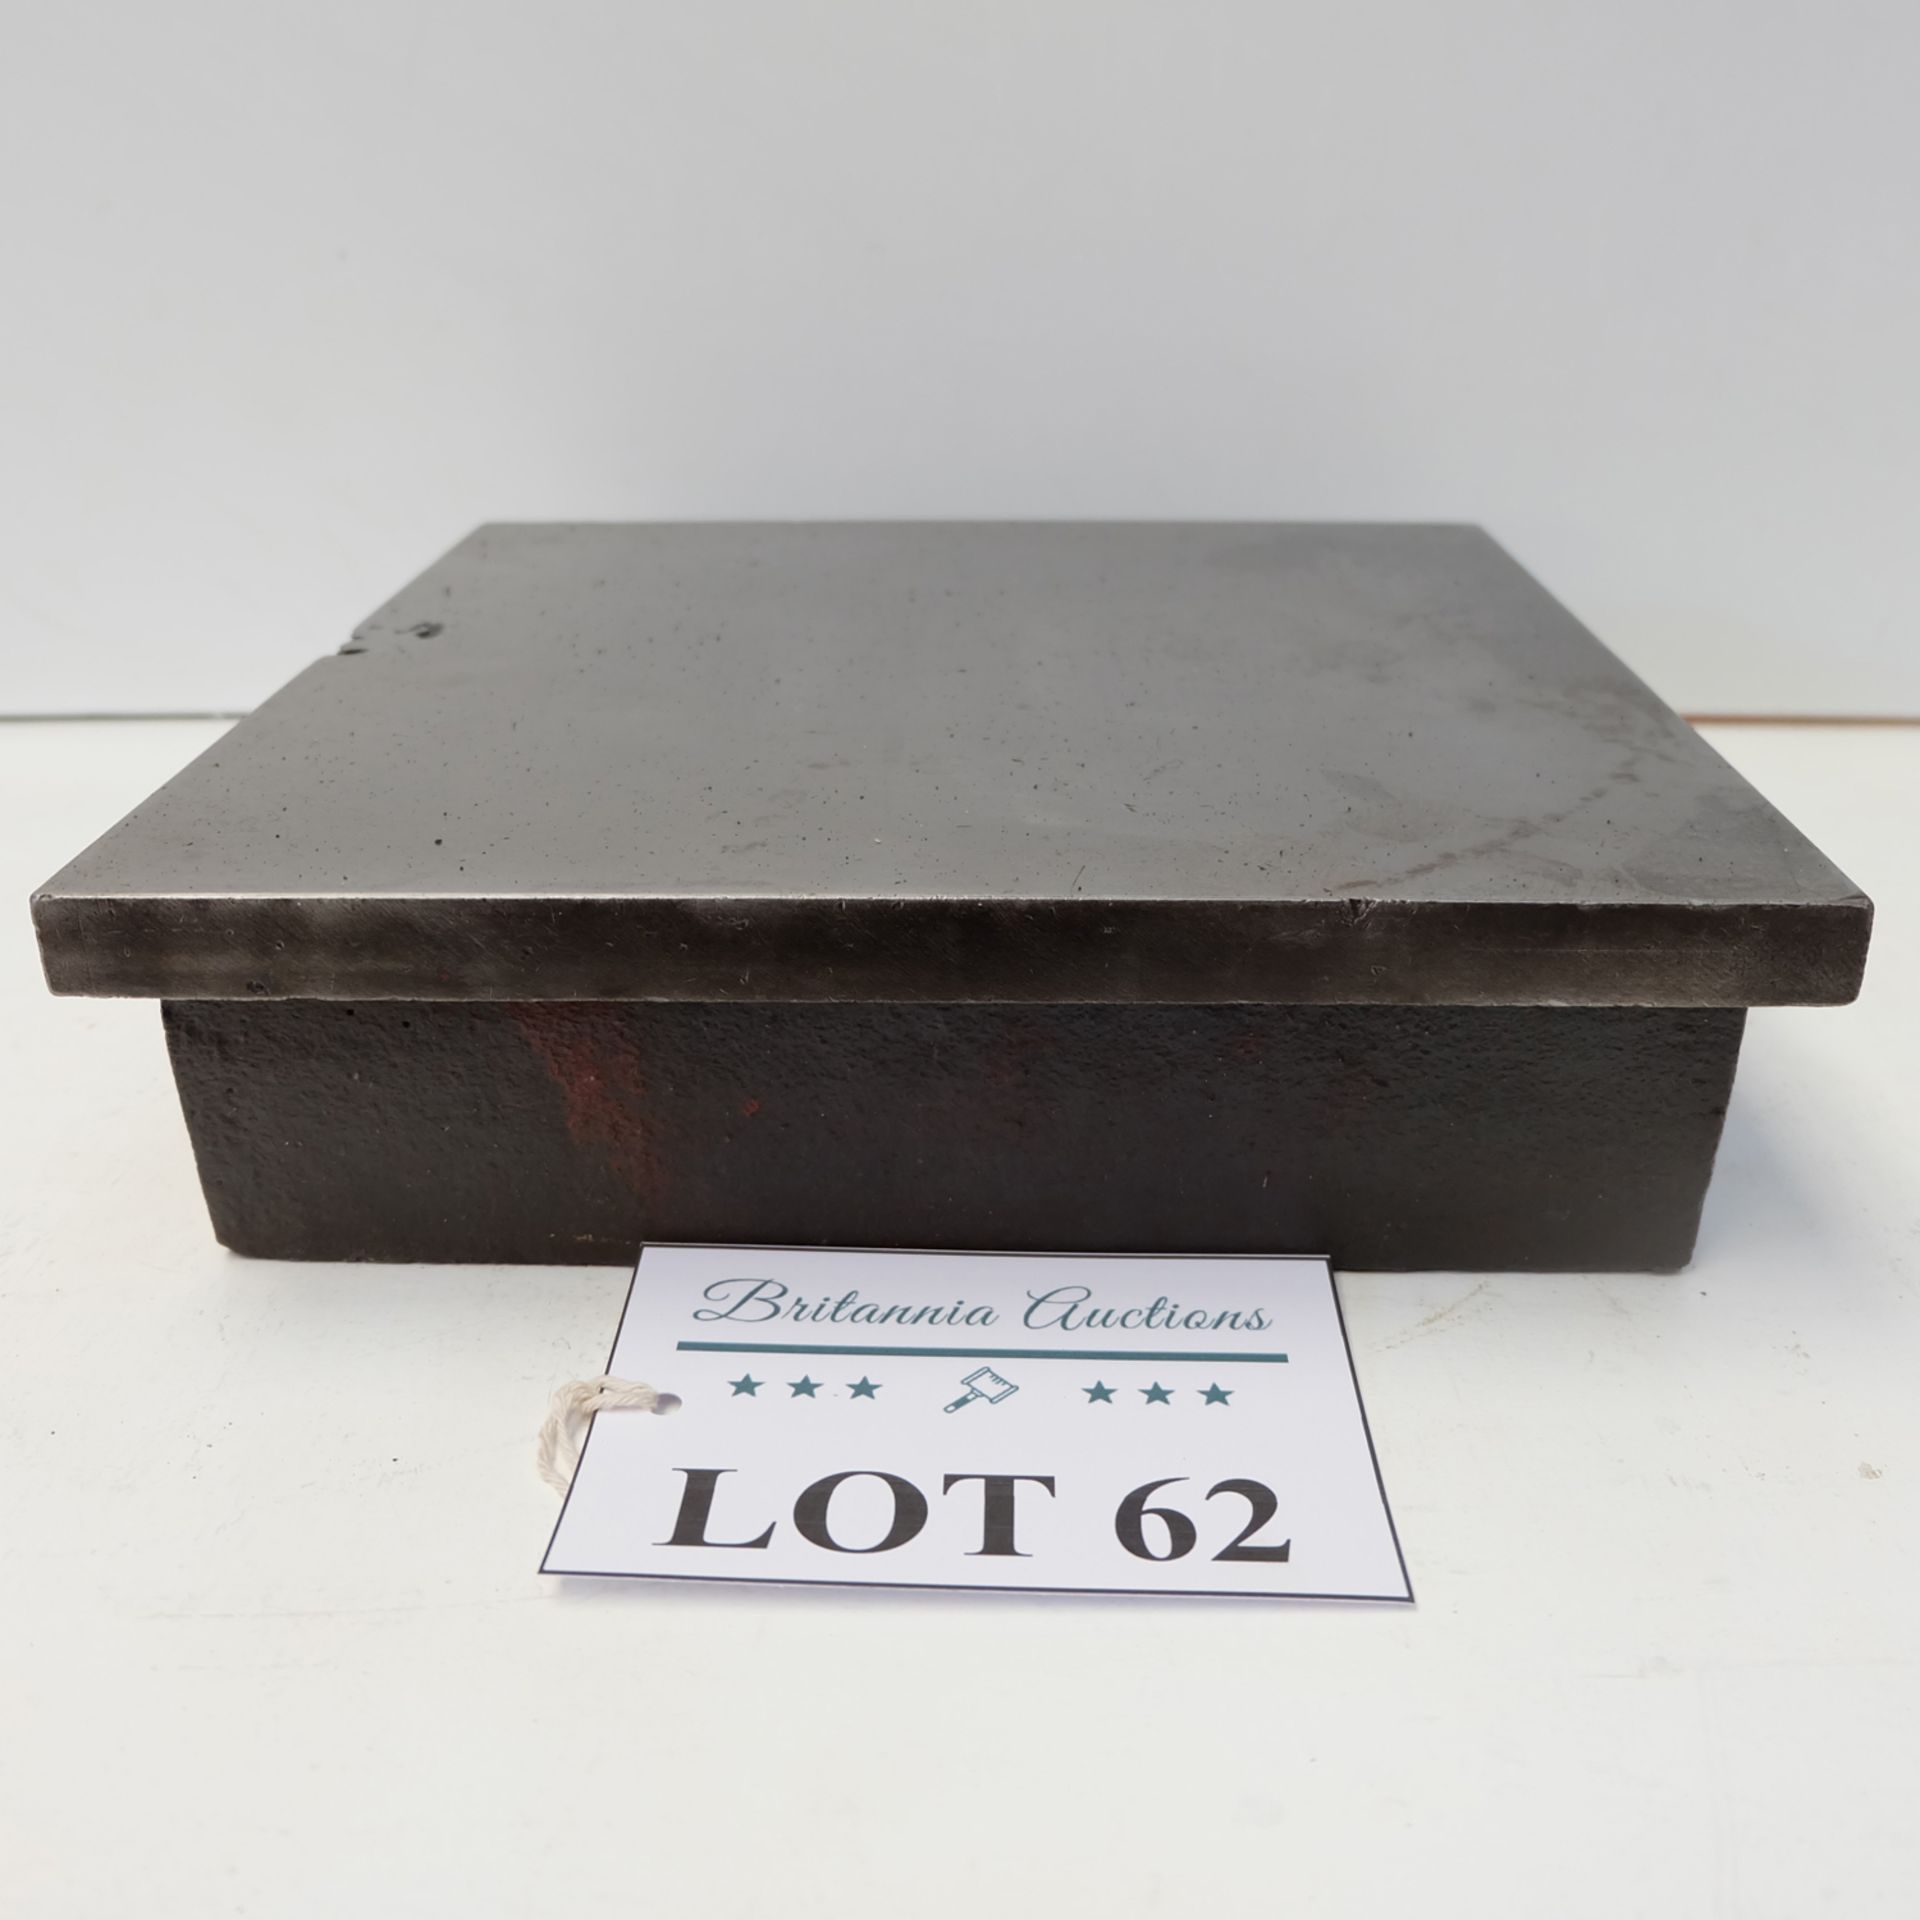 Cast Iron Surface Plate. 310mm x 310mm Approx. - Image 4 of 4